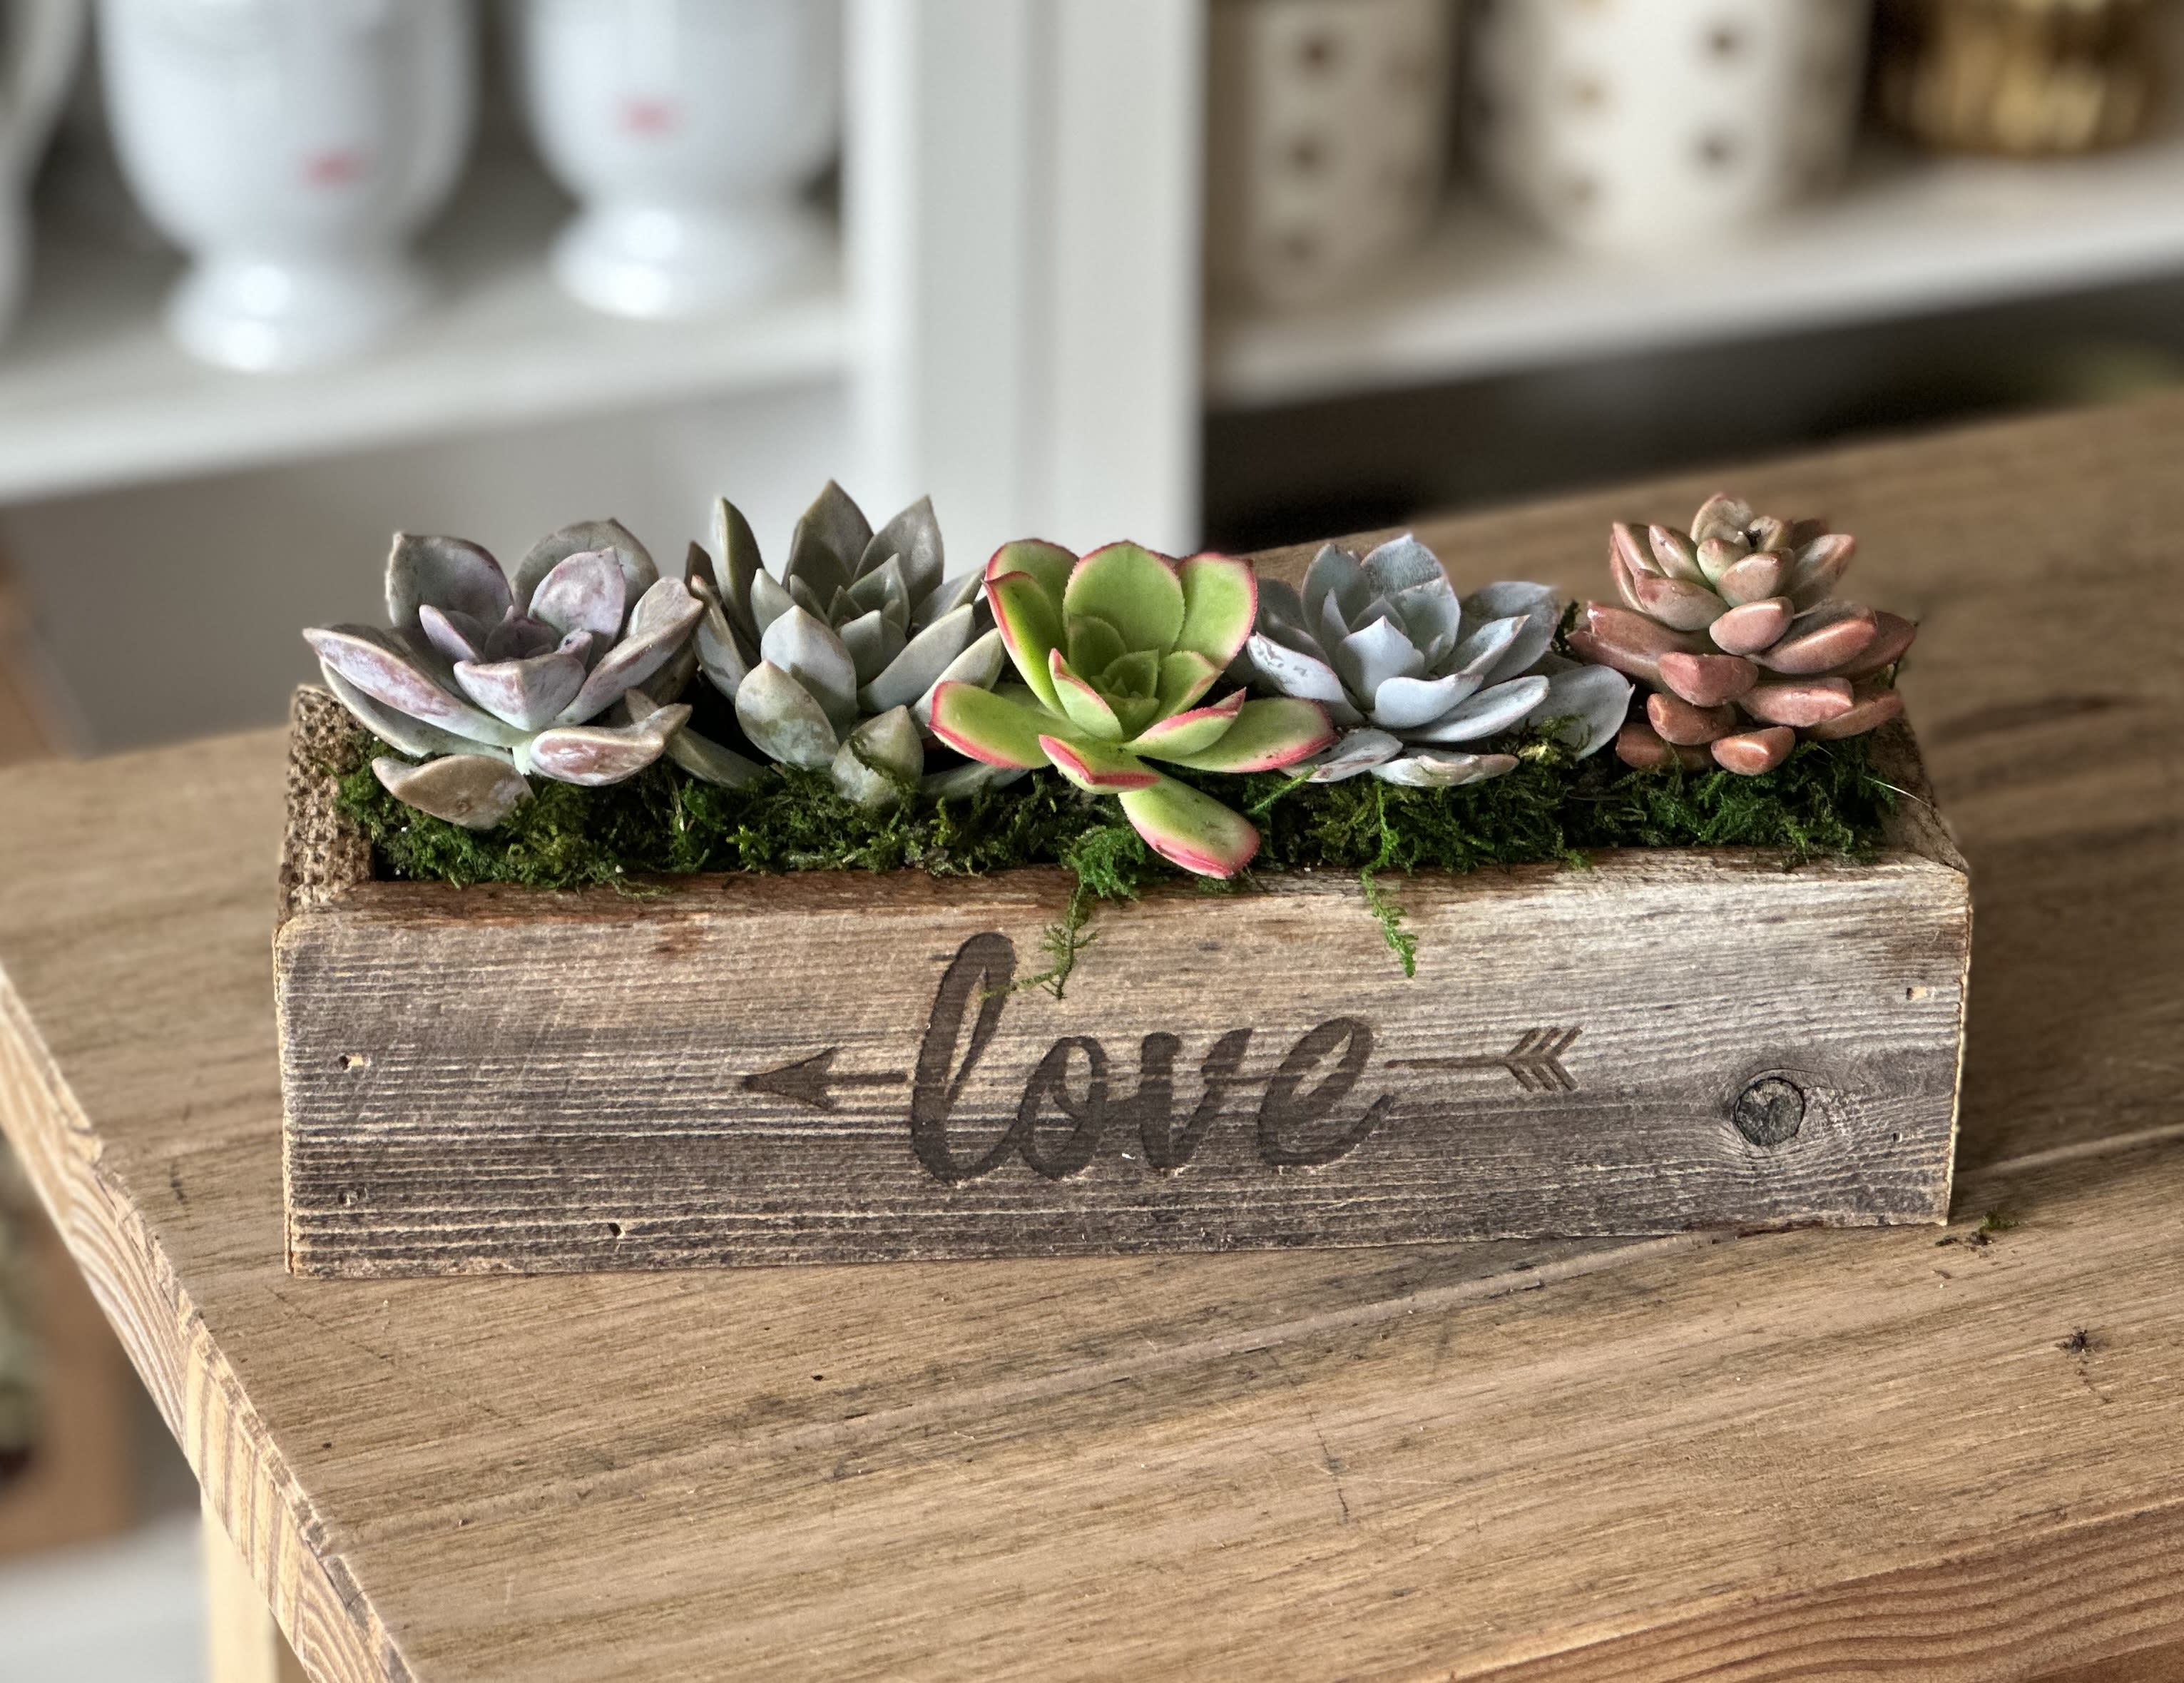 All You Need Is Love  - The Beatles said it best All you need is love! Make a truly original tribute to love with our All You Need Is Love planter box! It is a beautiful piece of art with its reclaimed wood construction, rustic styling, and colorful succulents. The perfect gift for a loved one or friend, this charming planter will be an eye-catching addition to any room.  